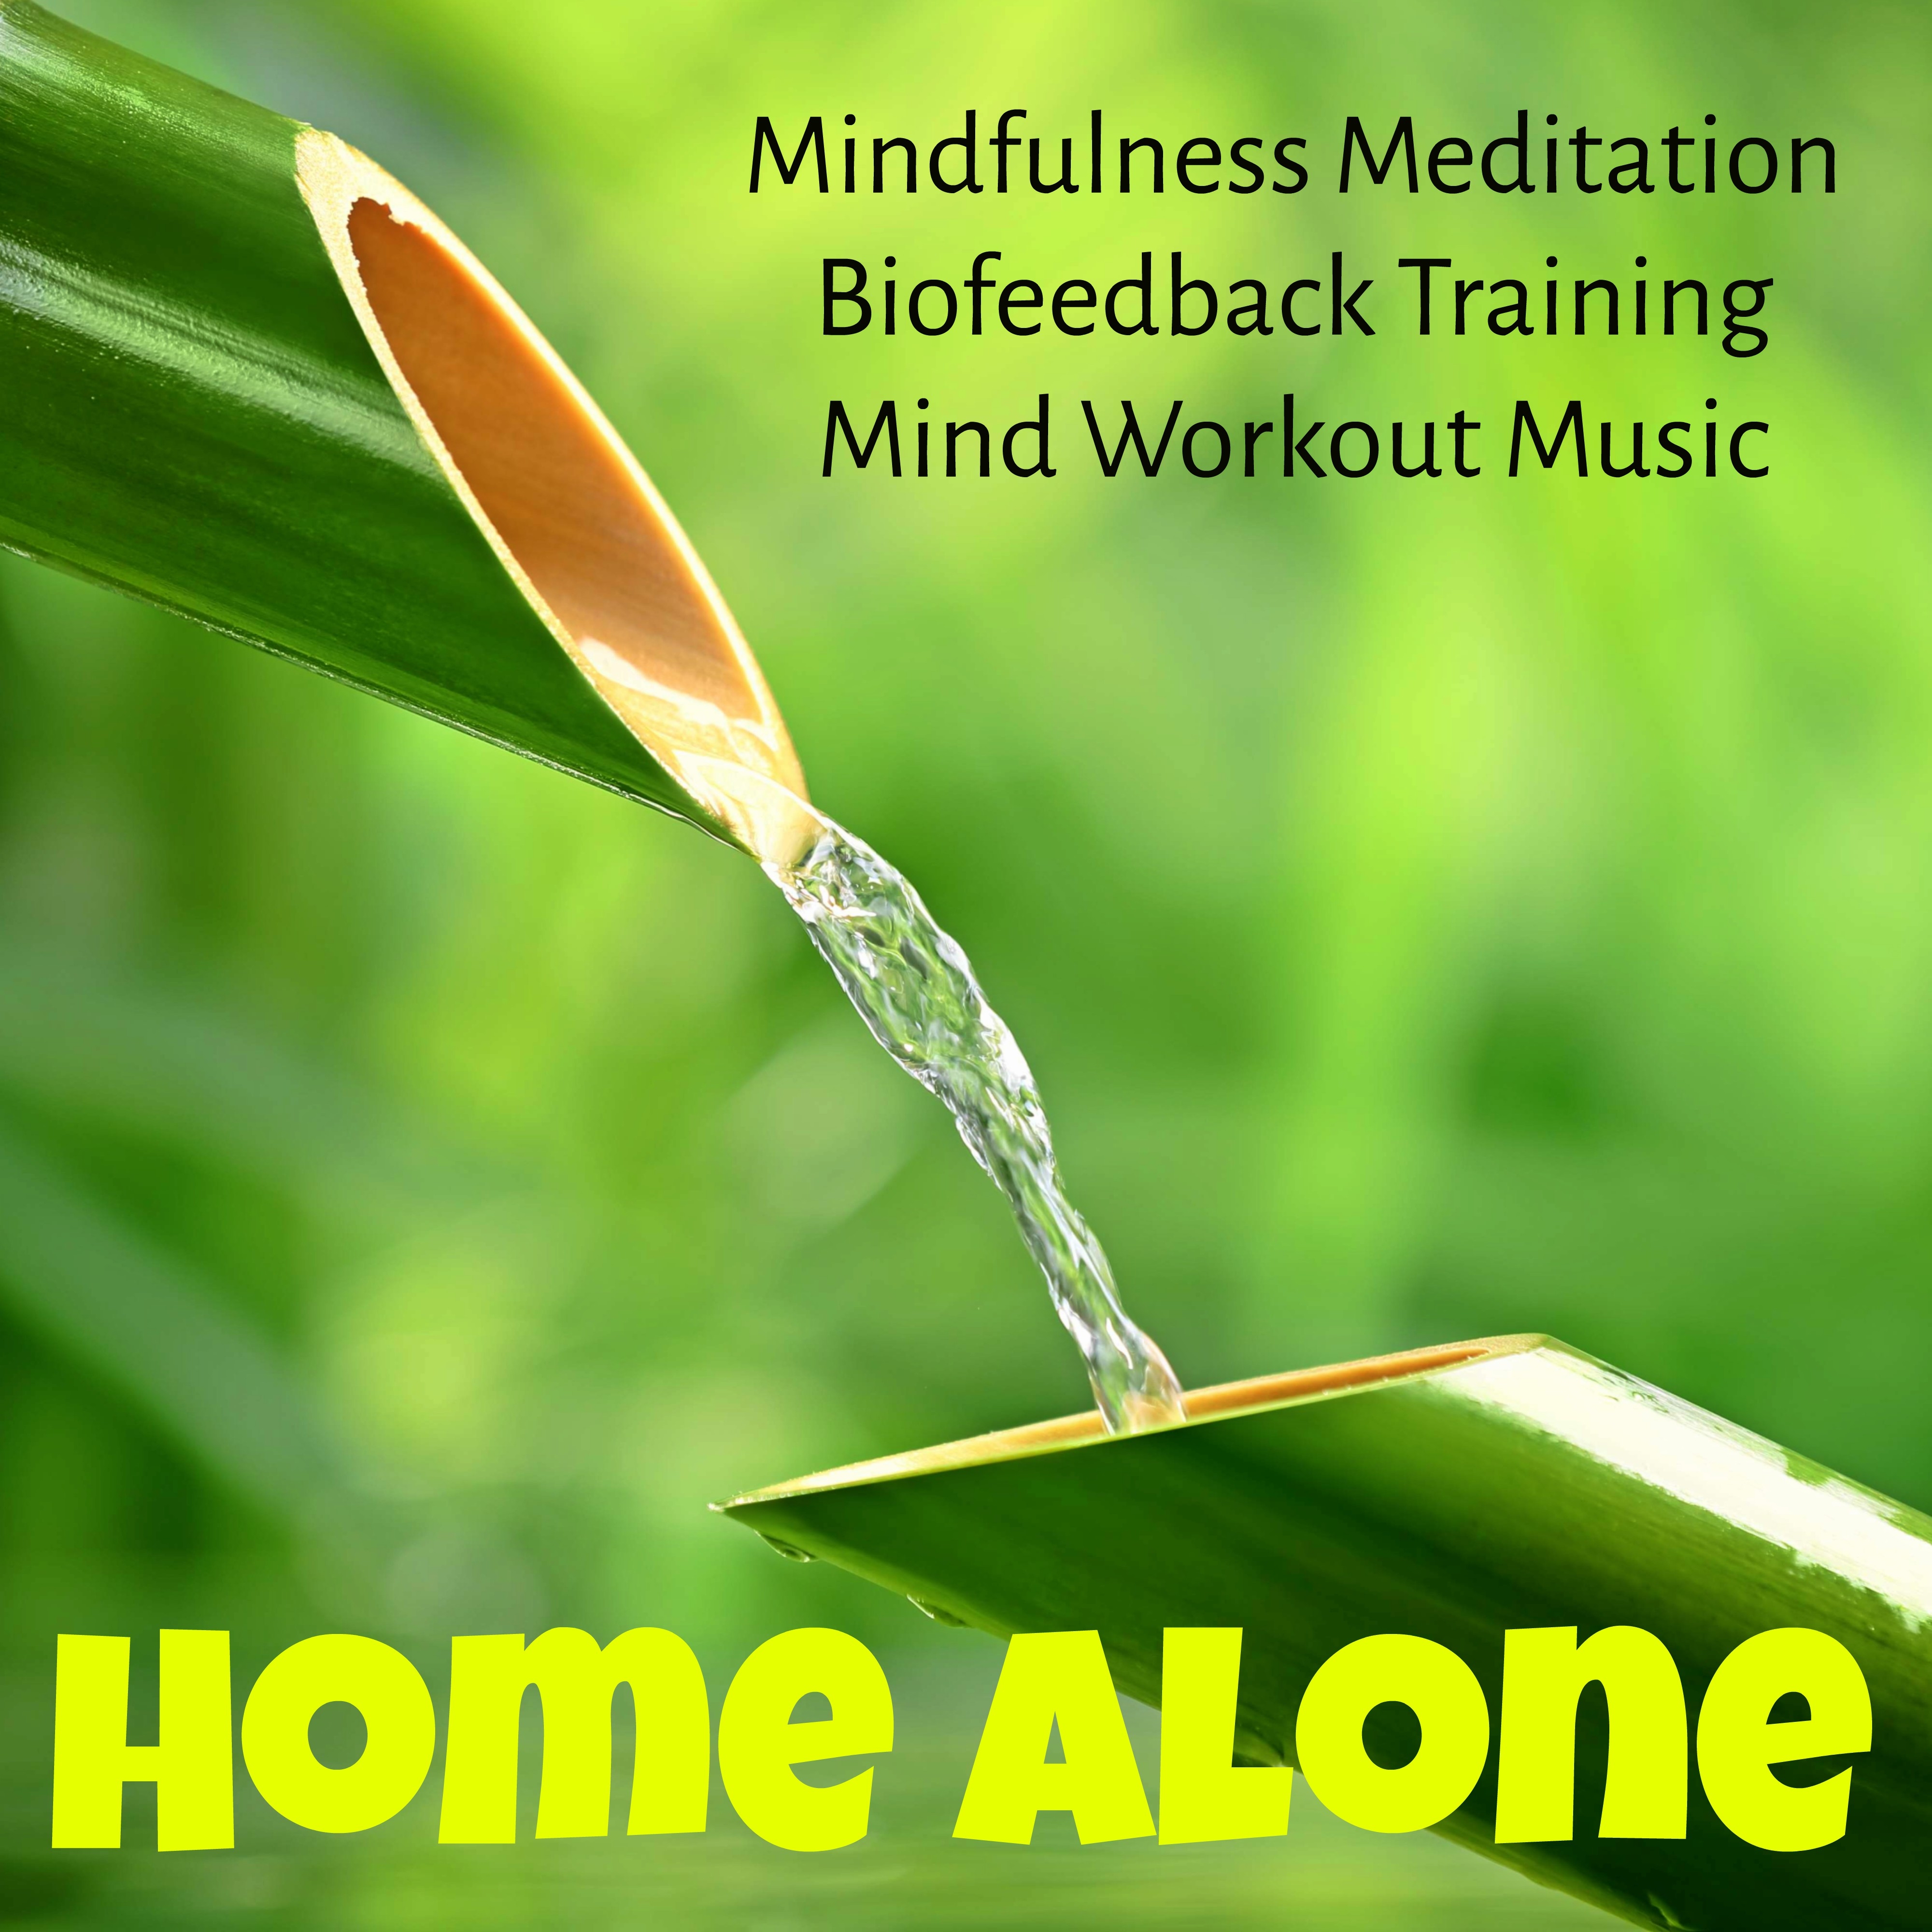 Home Alone - Mindfulness Meditation Biofeedback Training Mind Workout Music with Natural New Age Instrumental Sounds